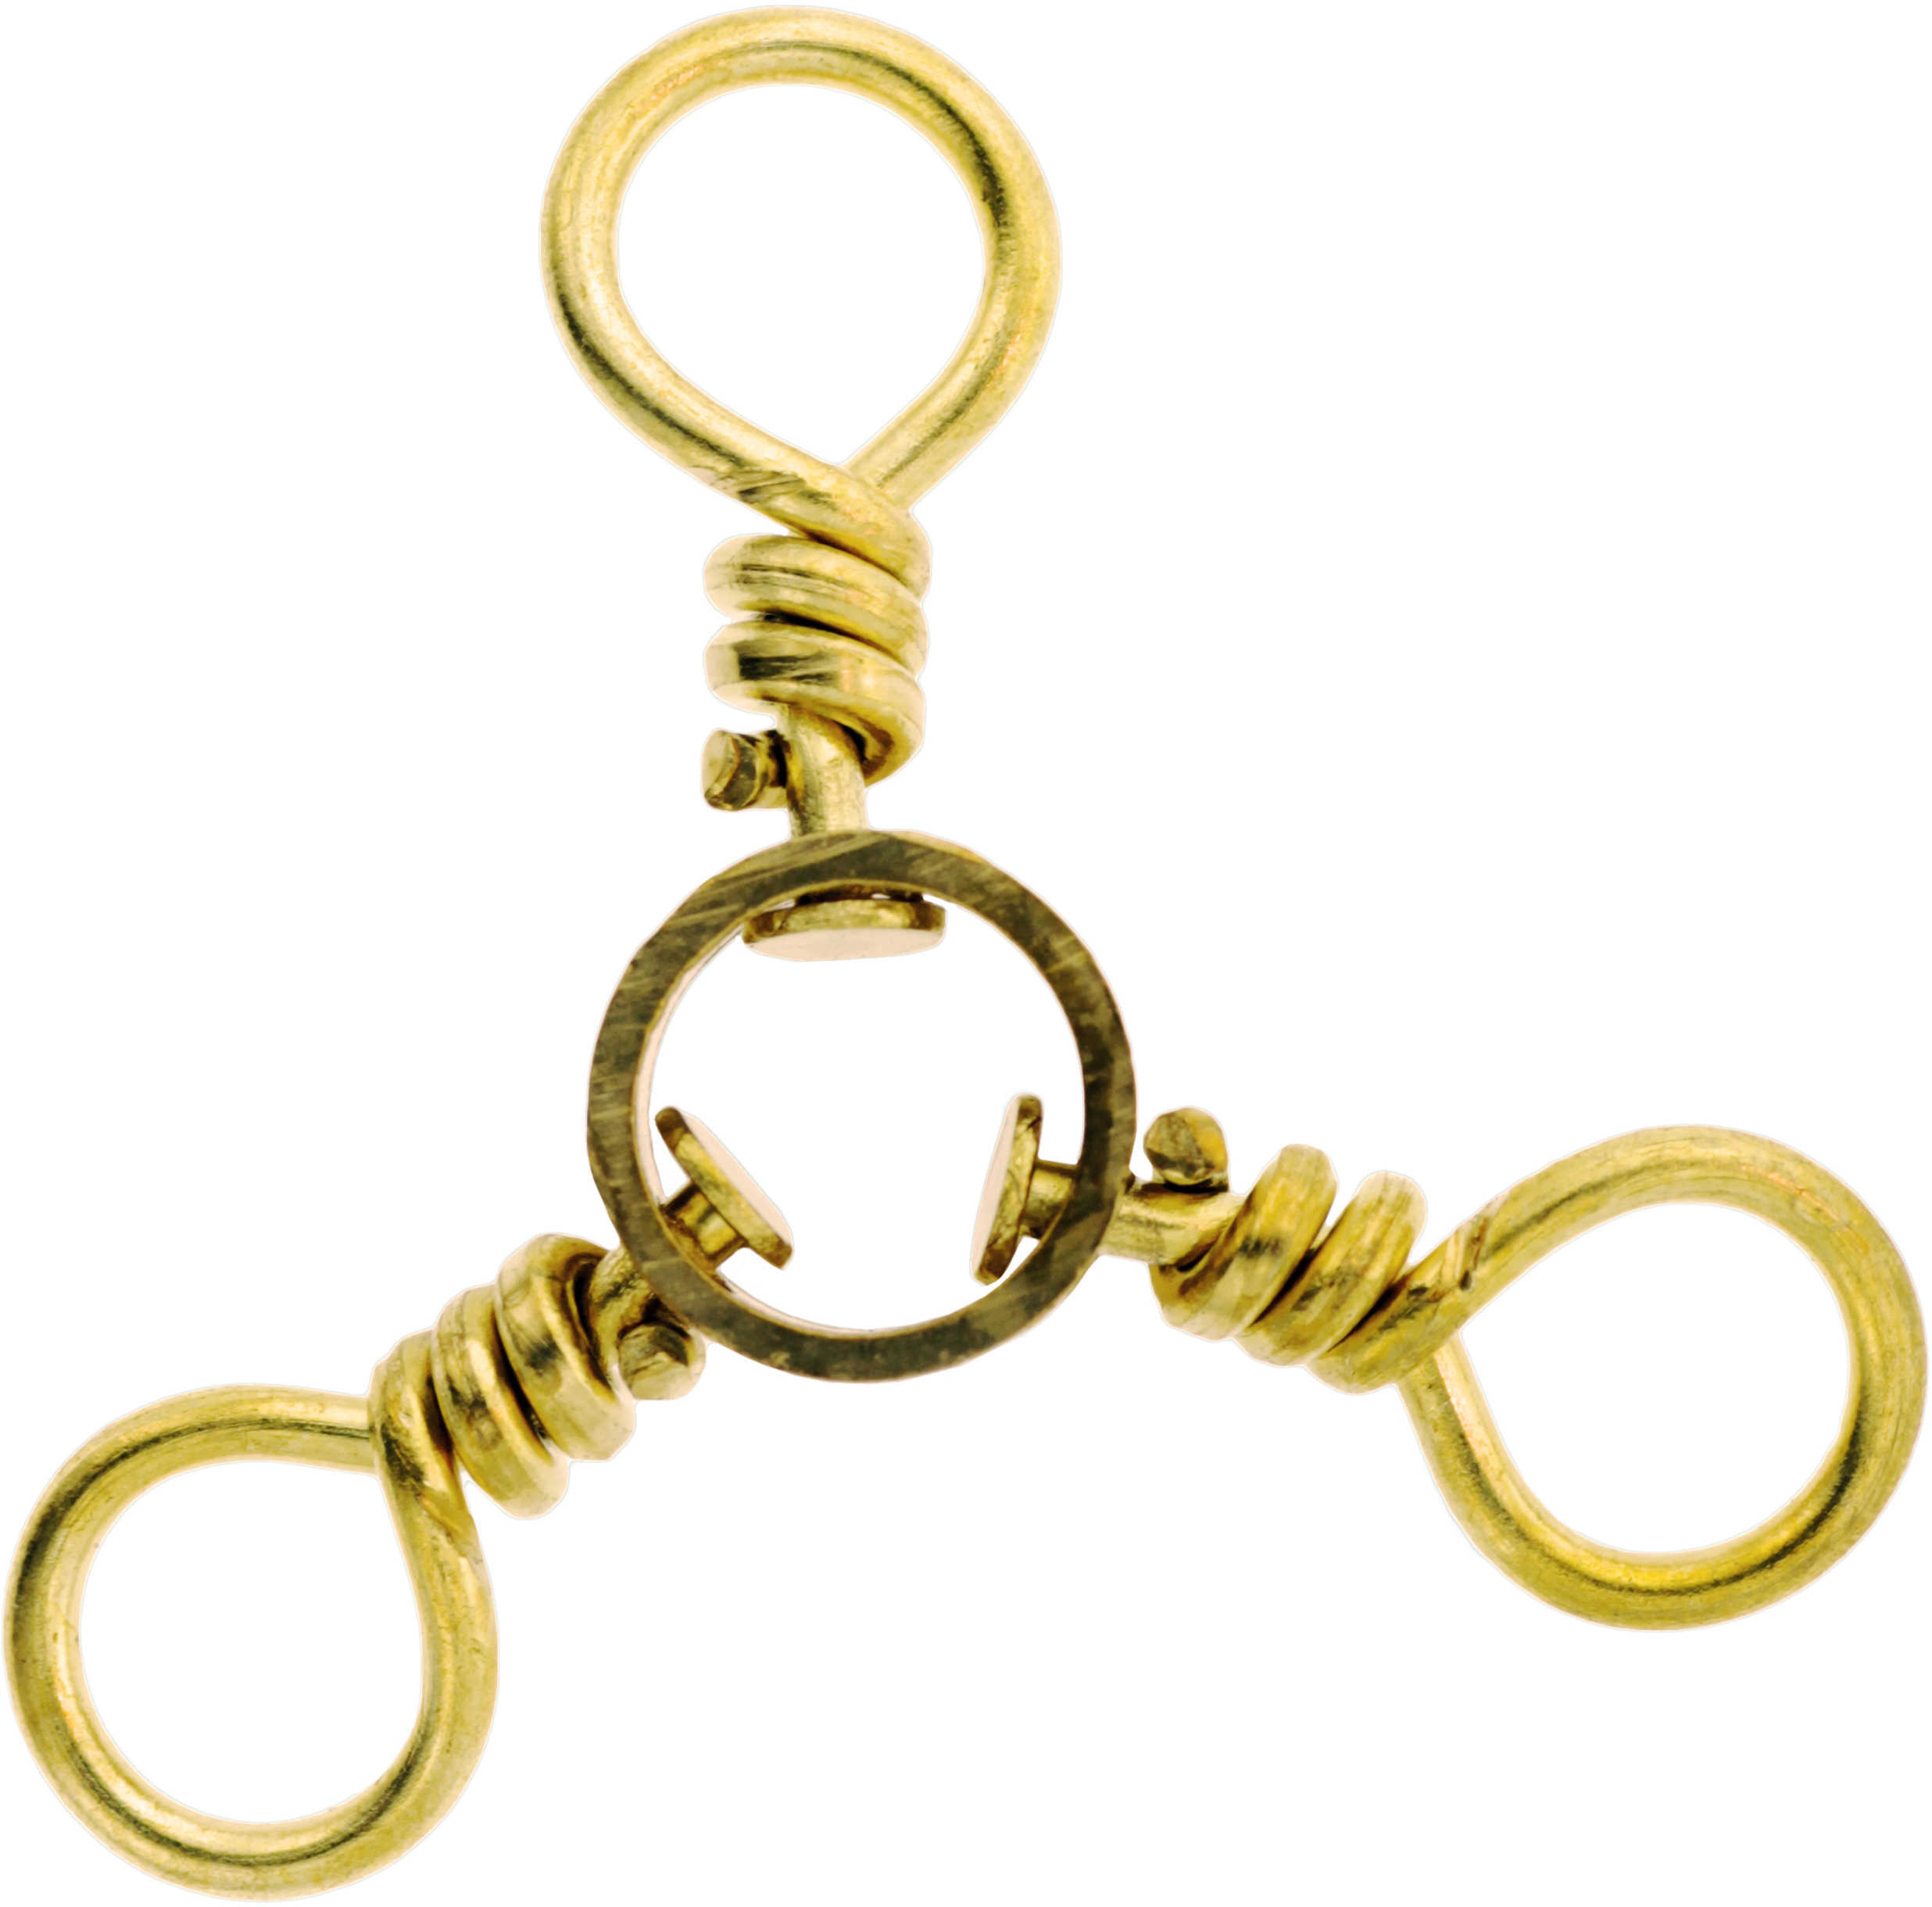 Eagle Claw Fishing Tackle 3-Way Swivel Brass Size2 3Pk 01151-002